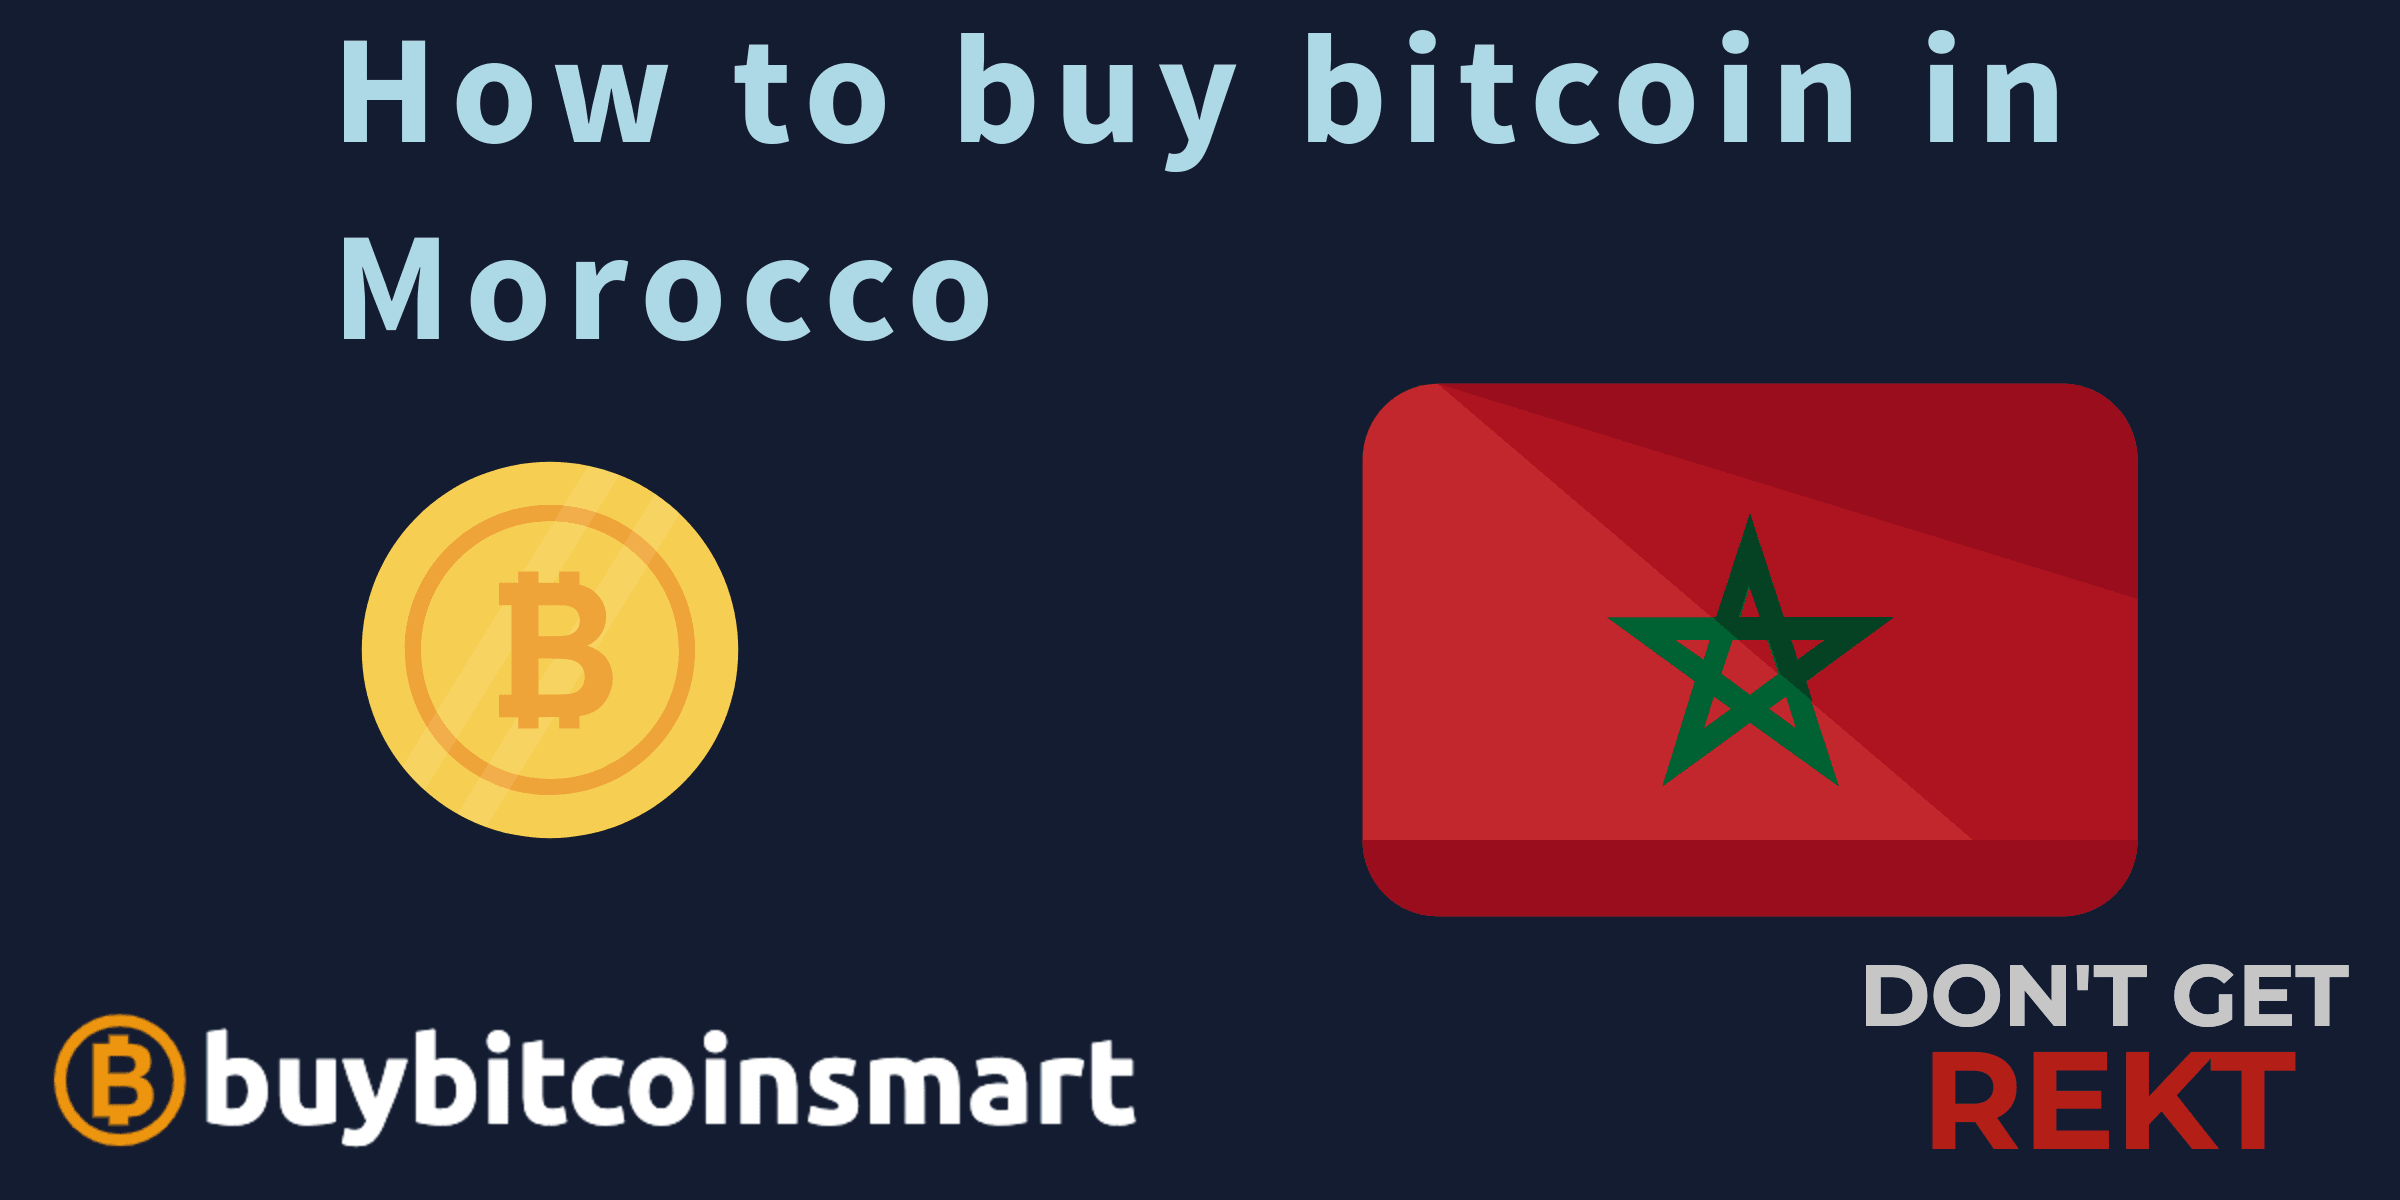 How to buy bitcoin in Morocco